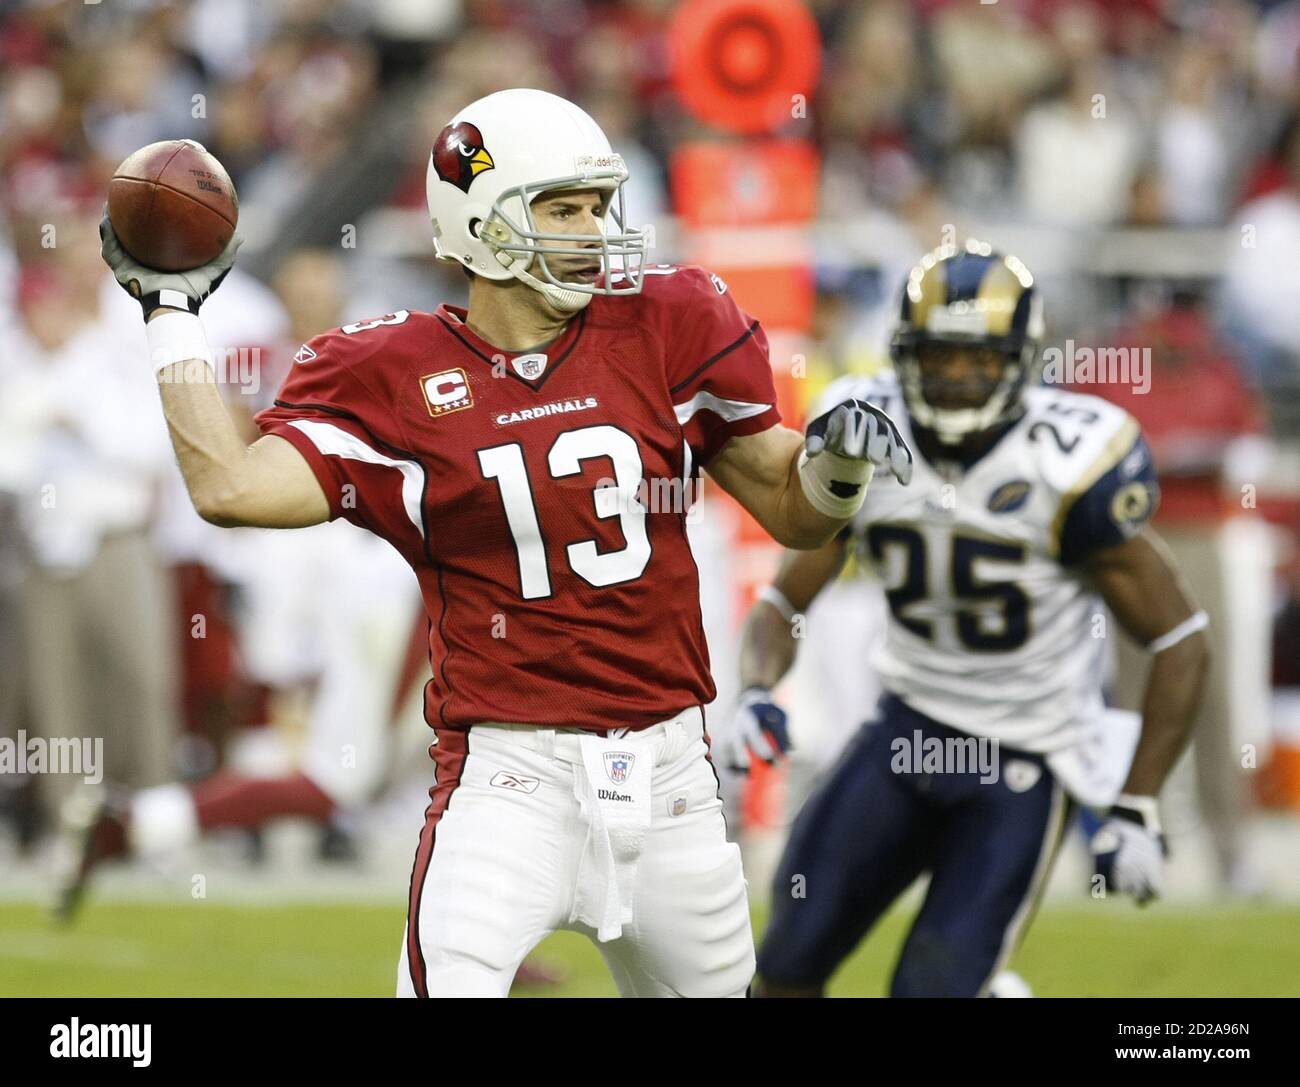 Arizona Cardinals quarterback Kurt Warner (L) throws down field against the St Louis Rams in the third quarter during an NFL game in Glendale, Arizona, December 7, 2008. The Cardinals captured the NFC West by defeating the Rams 34-10. REUTERS/Rick Scuteri (UNITED STATES) Stock Photo